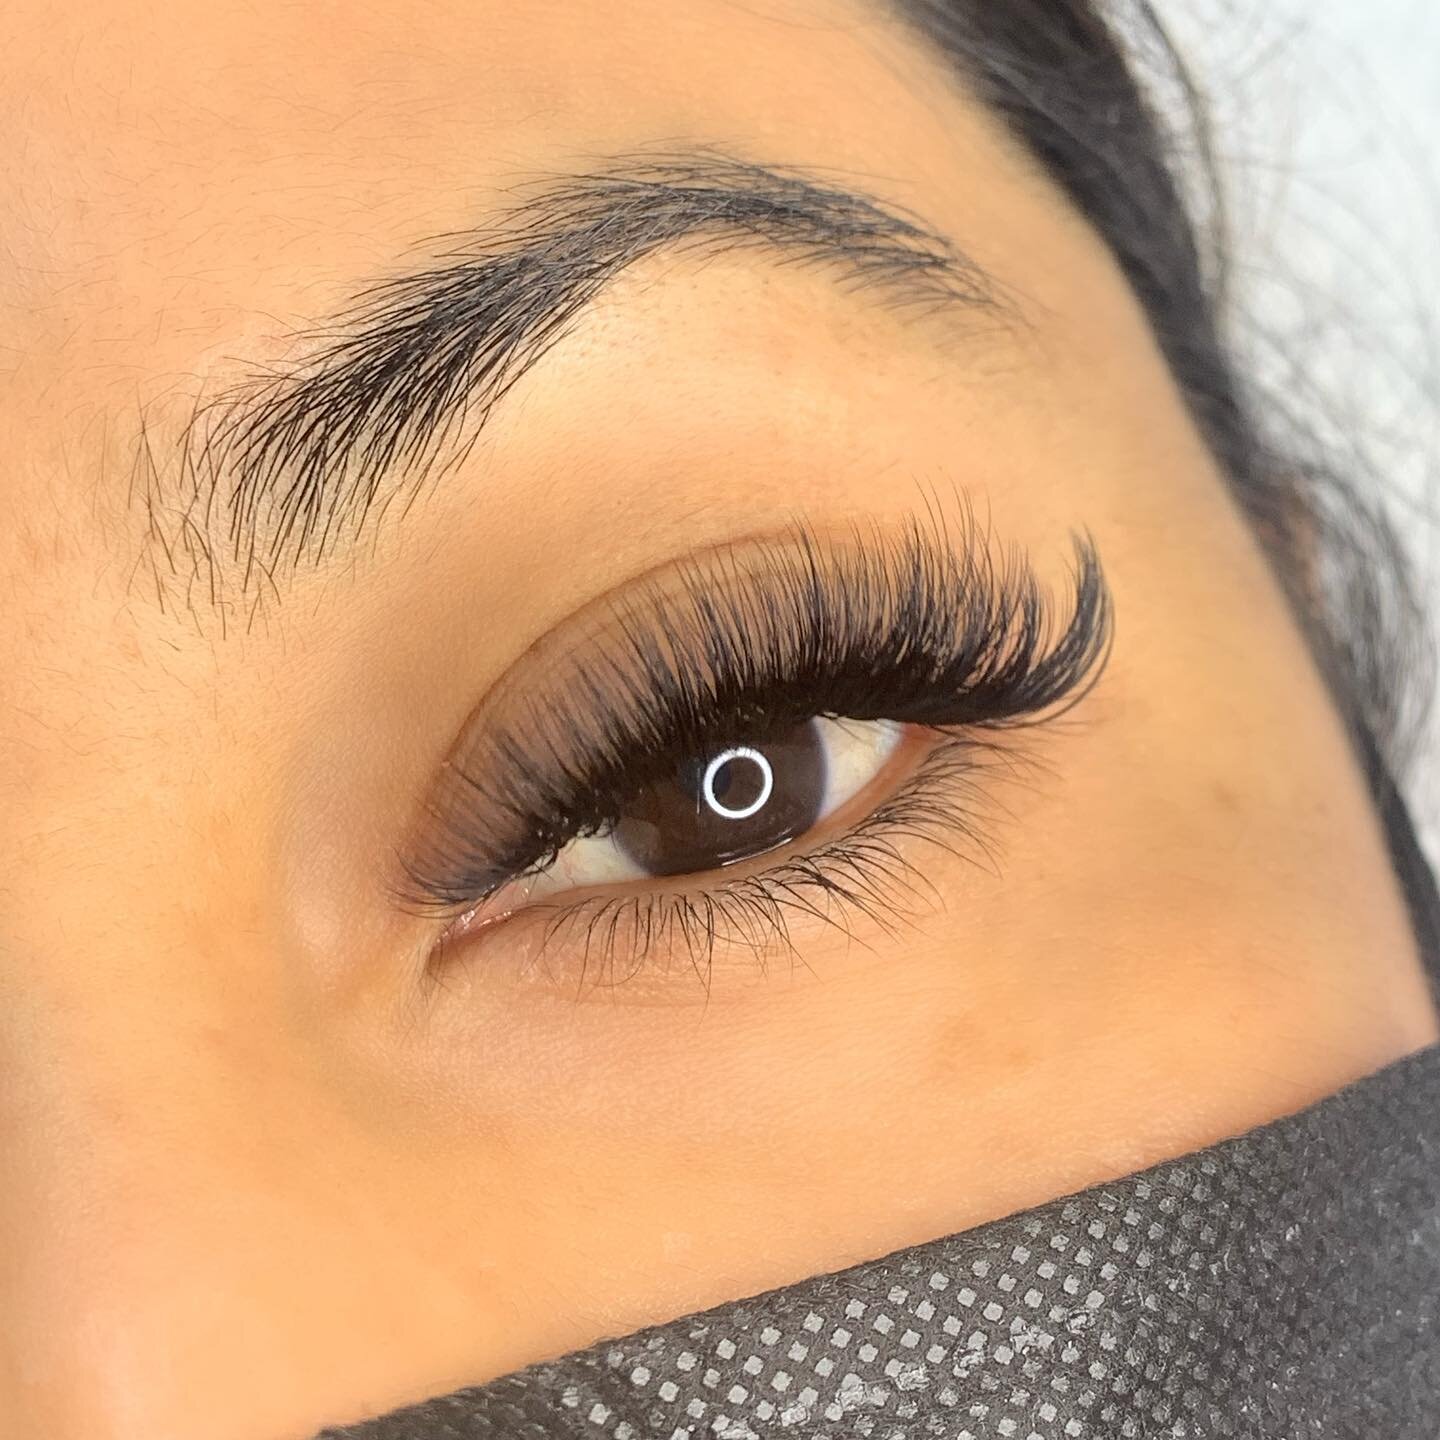 🌼🌷Shedding Season 🌻🌺 is here. It&rsquo;s normal to lose more lashes than normal. Eyelash shedding season occurs twice a year in Spring and Autumn when temperatures begin to change. Using a lash serum will help strengthen your natural lashes or yo